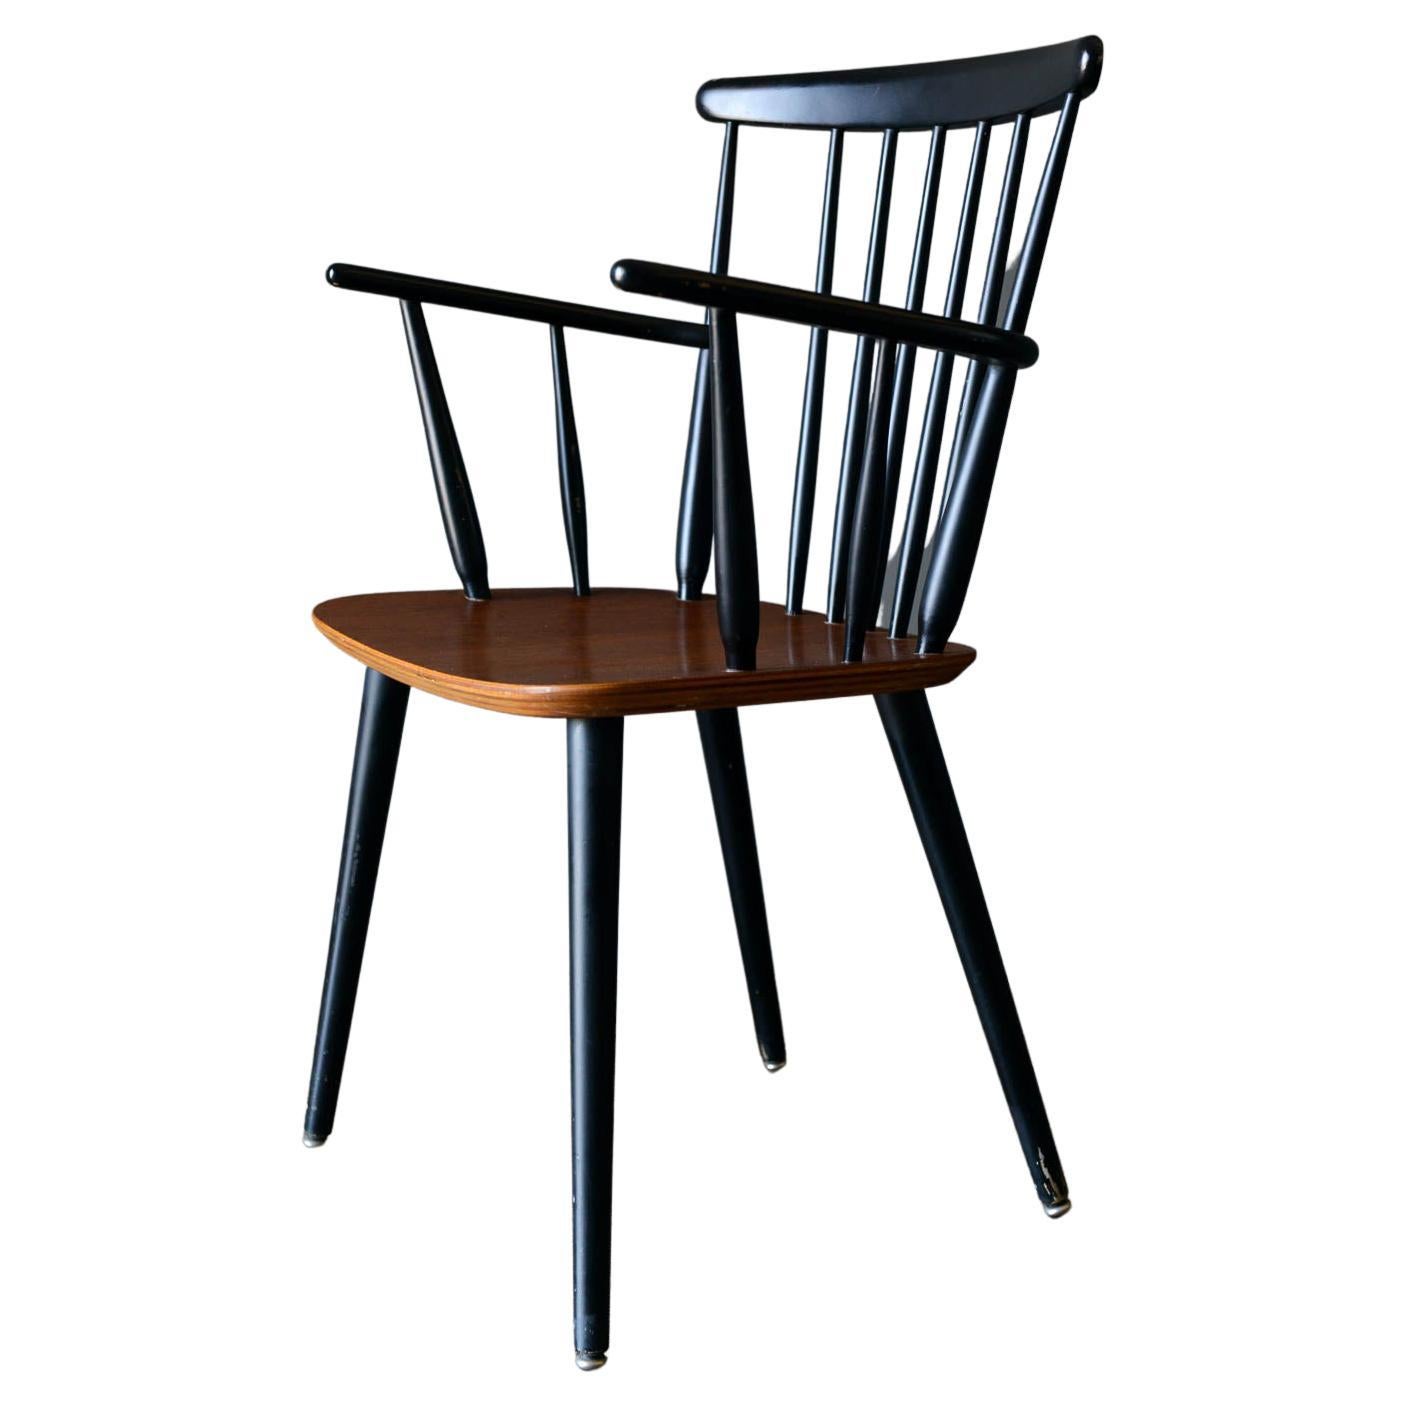 Danish Spindle Back Arm Chair by Thomas Harlev for Farstrup, 1960 For Sale